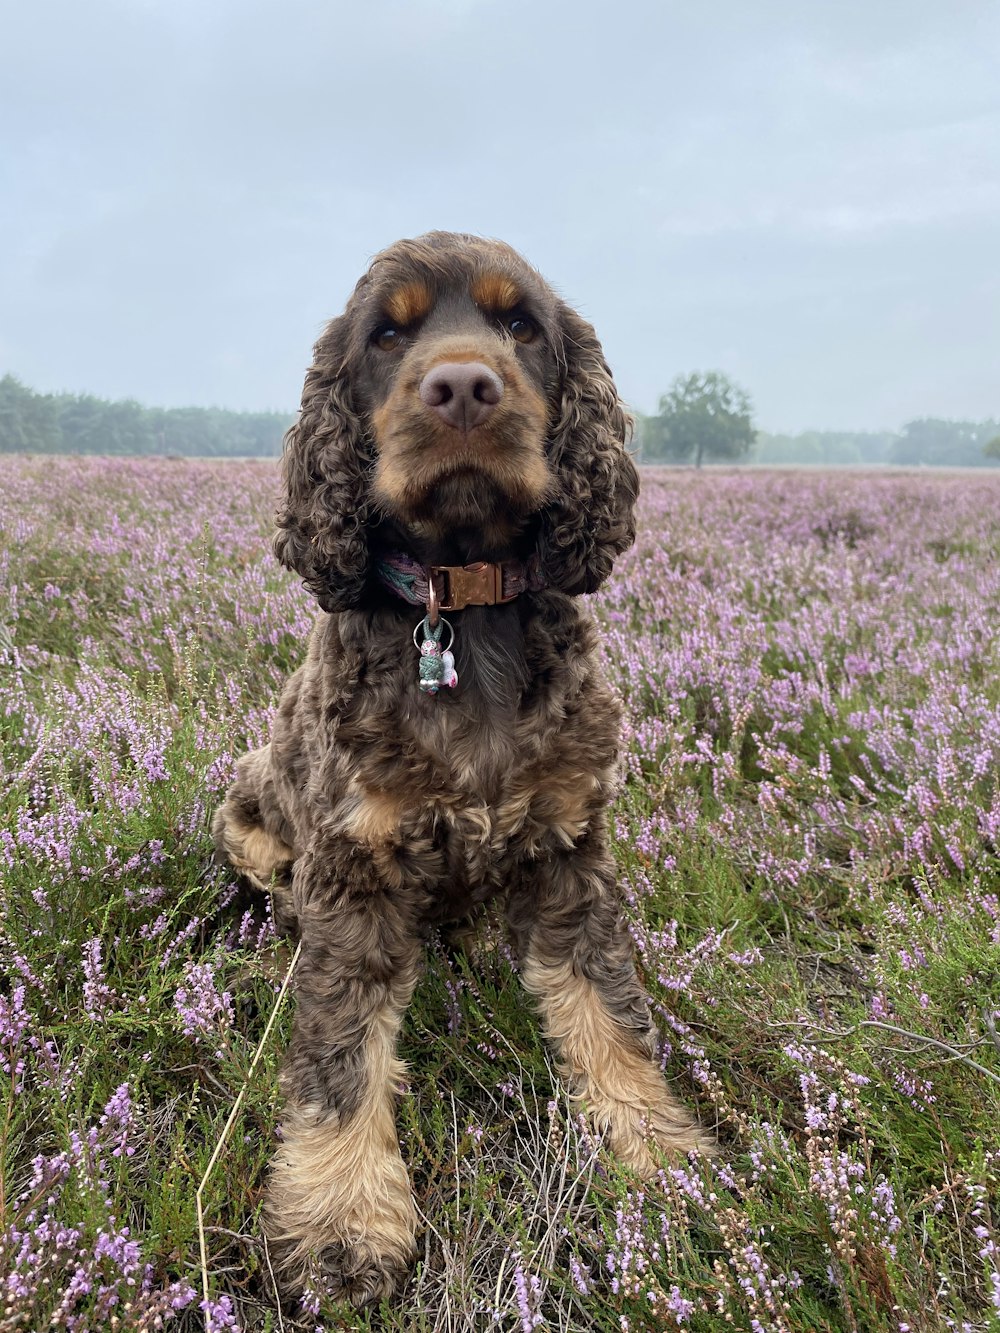 brown and black long coated dog on purple flower field during daytime